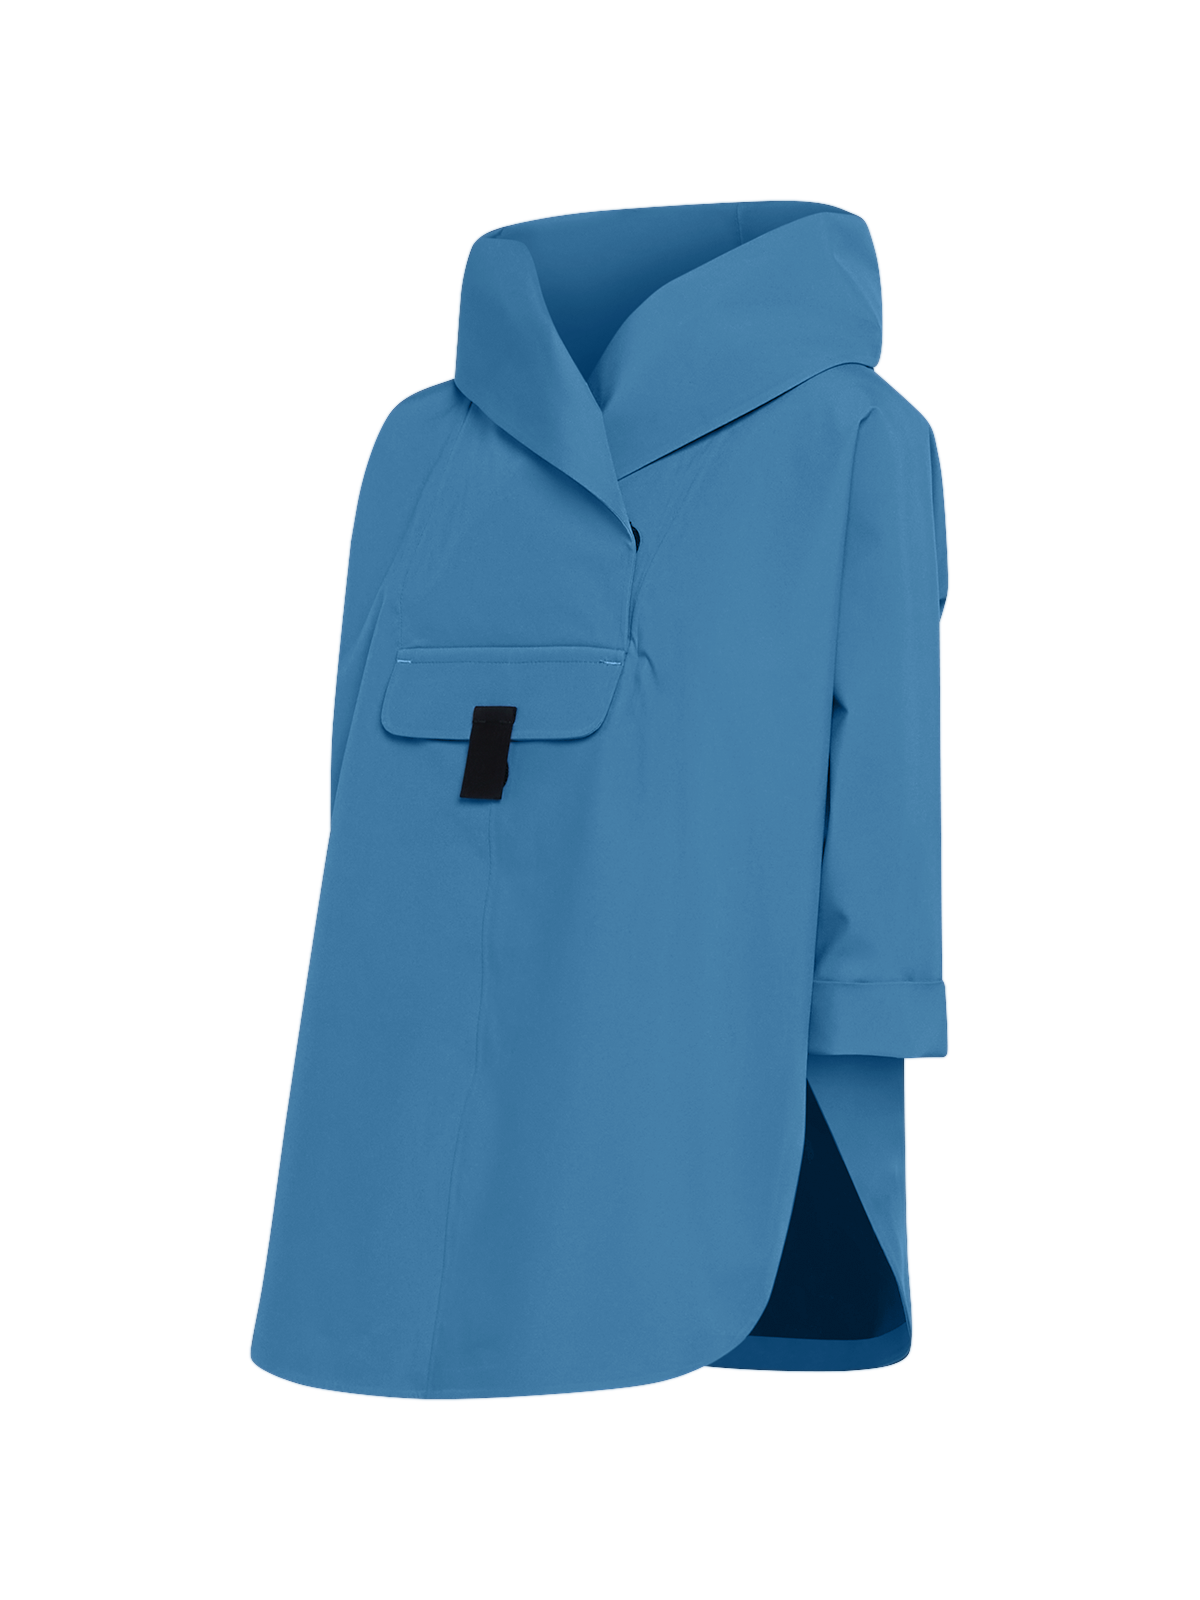 Bergen mini poncho in the color Coronet blue from the side